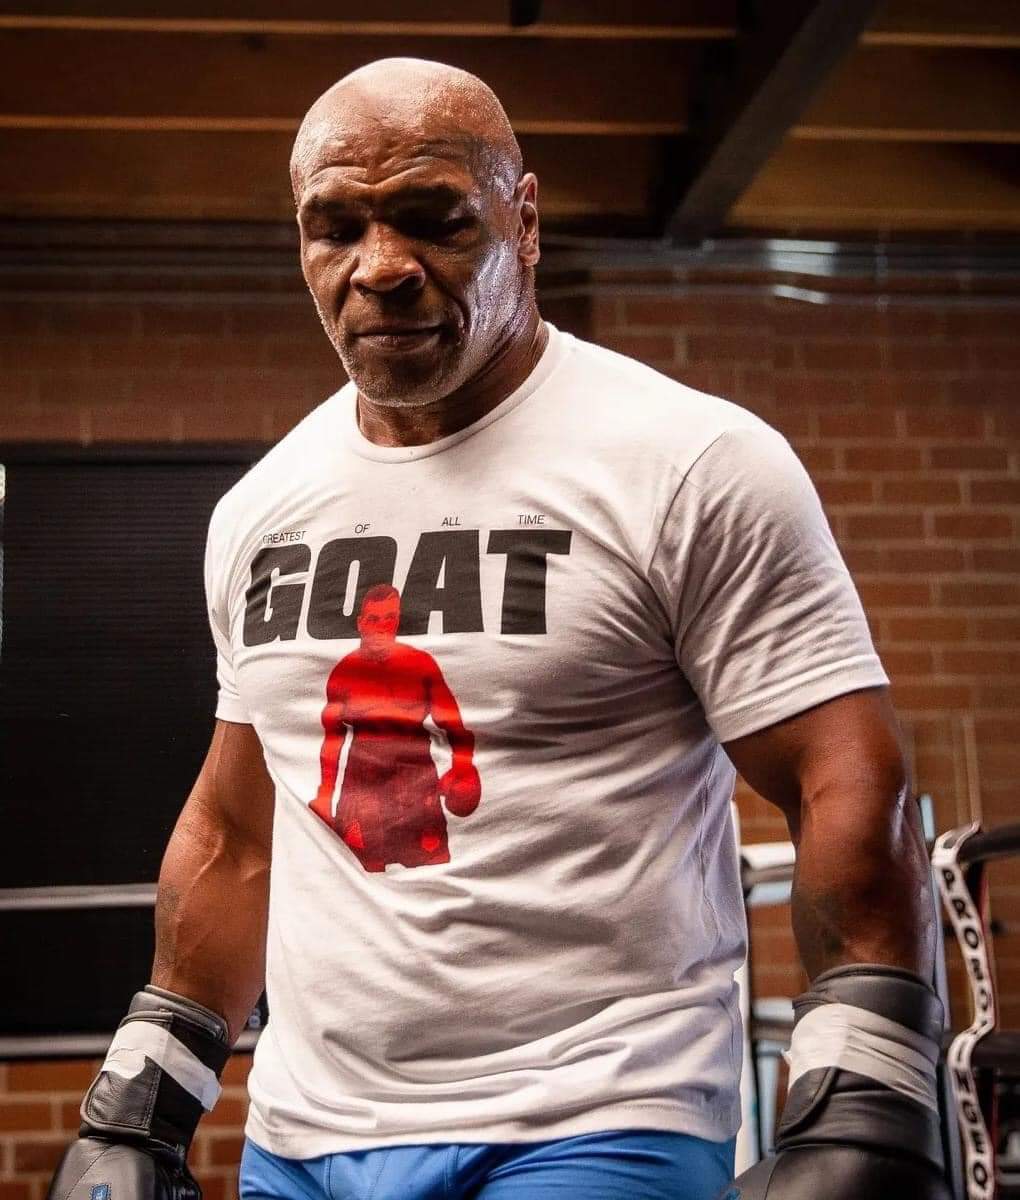 Happy birthday Mike Tyson.
GOAT. 56 looks good on you. Living legend. 